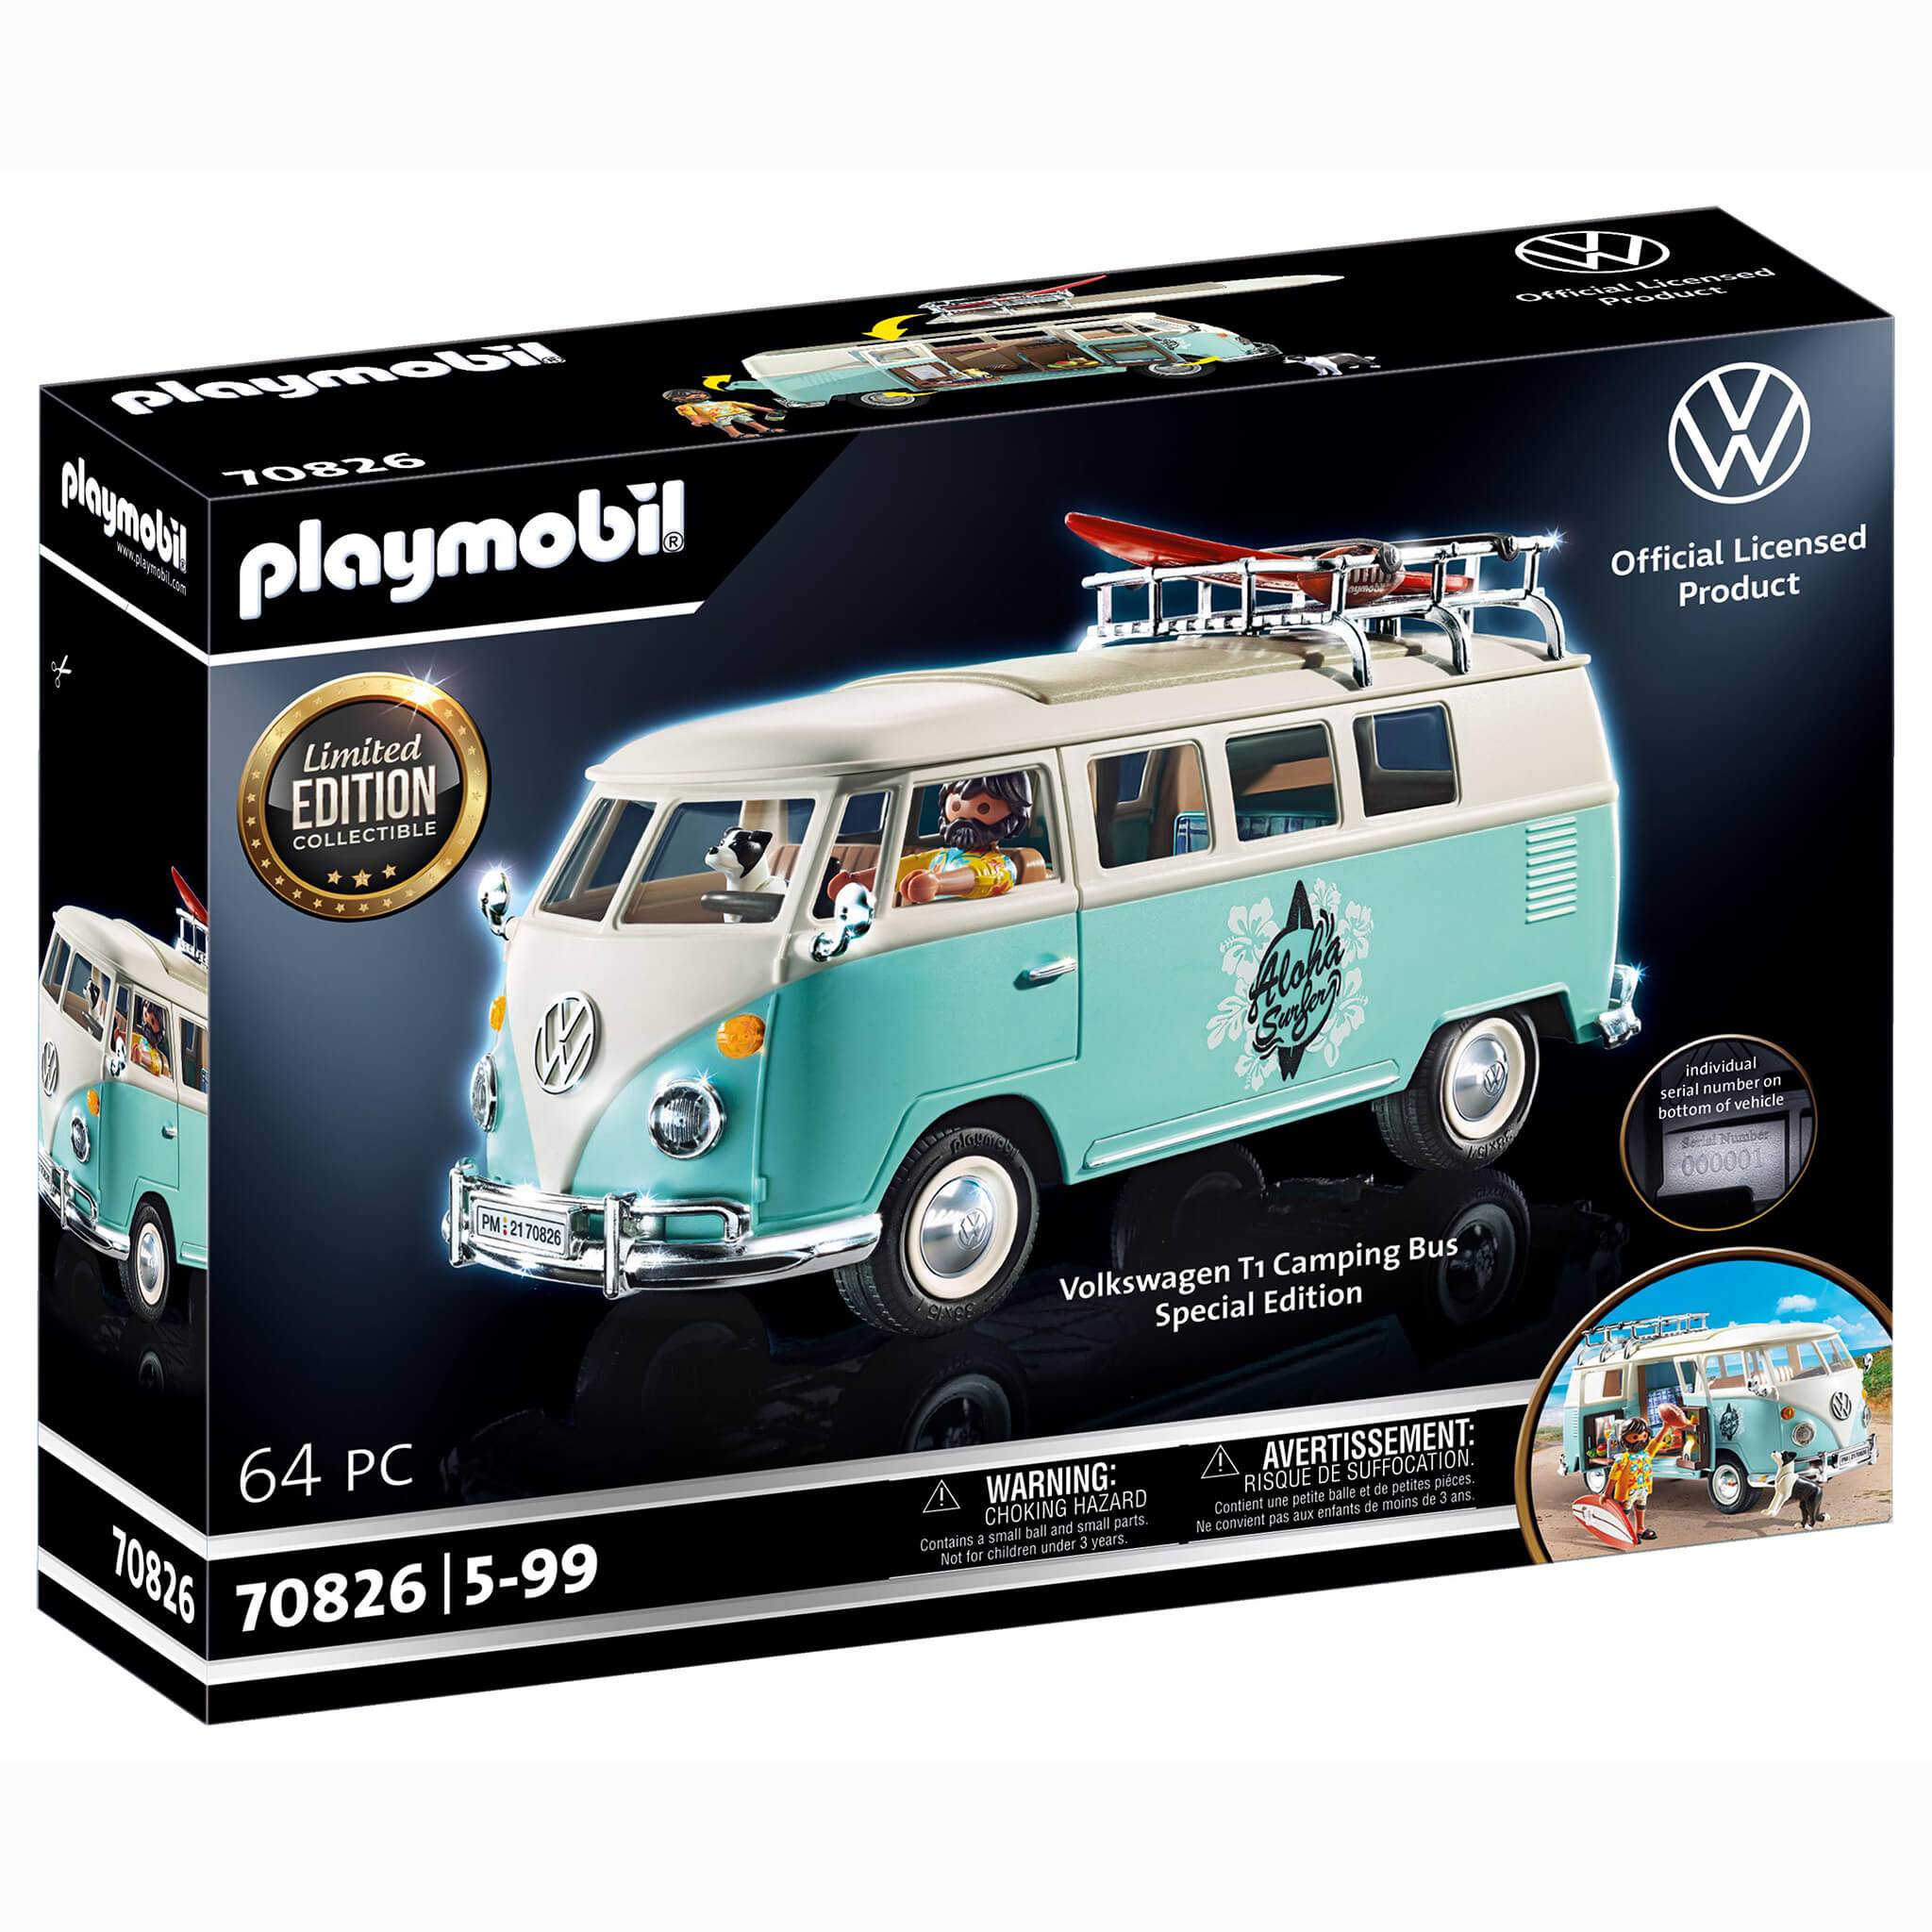 Playmobil - Volkswagen T1 Camping Bus - Special Edition